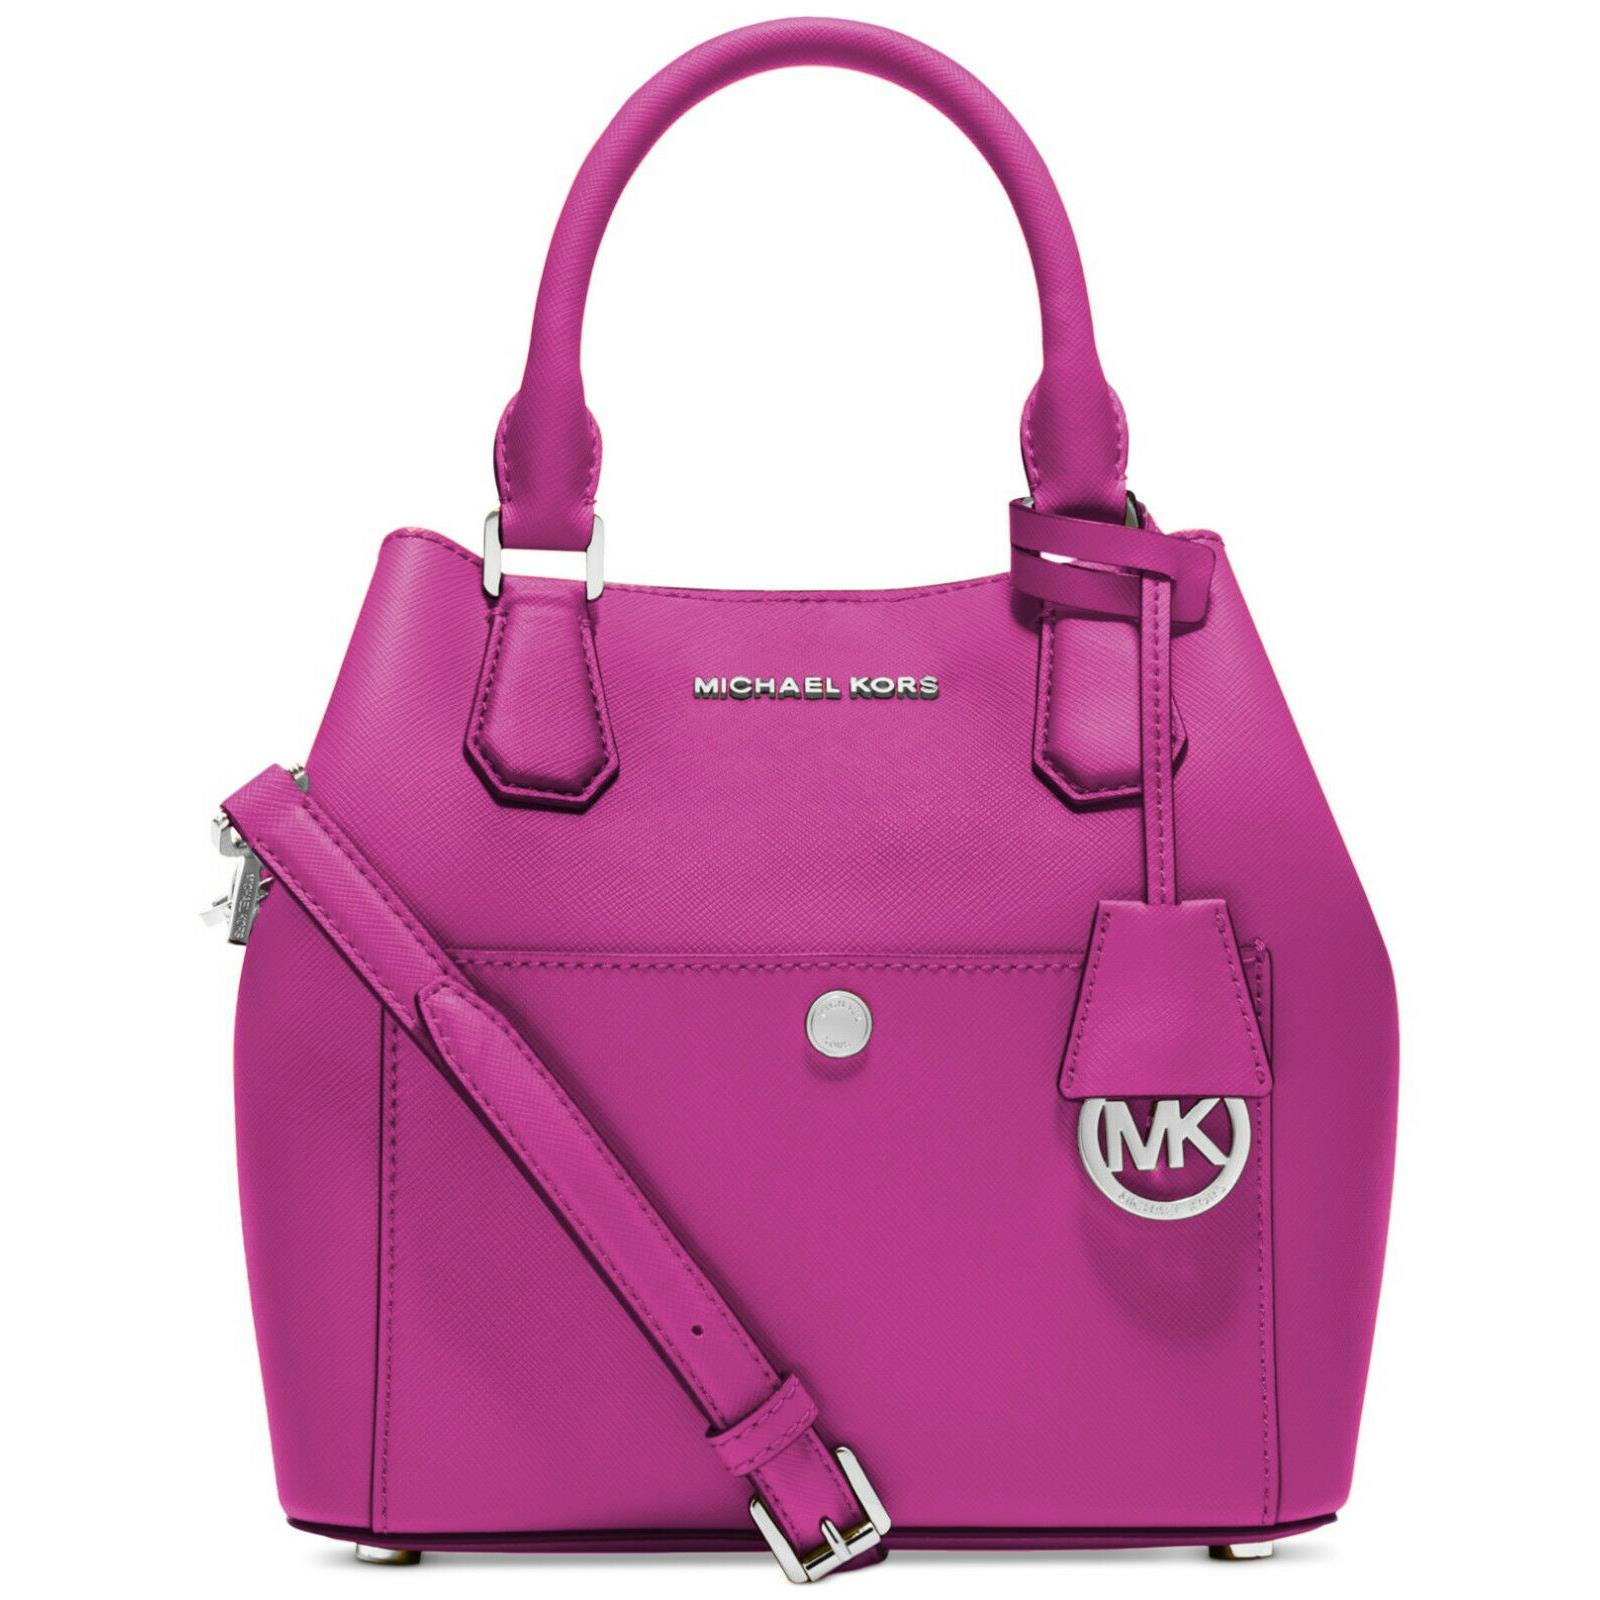 Michael Kors Greenwich Medium Tote in Fuschia Luggage Non Outlet